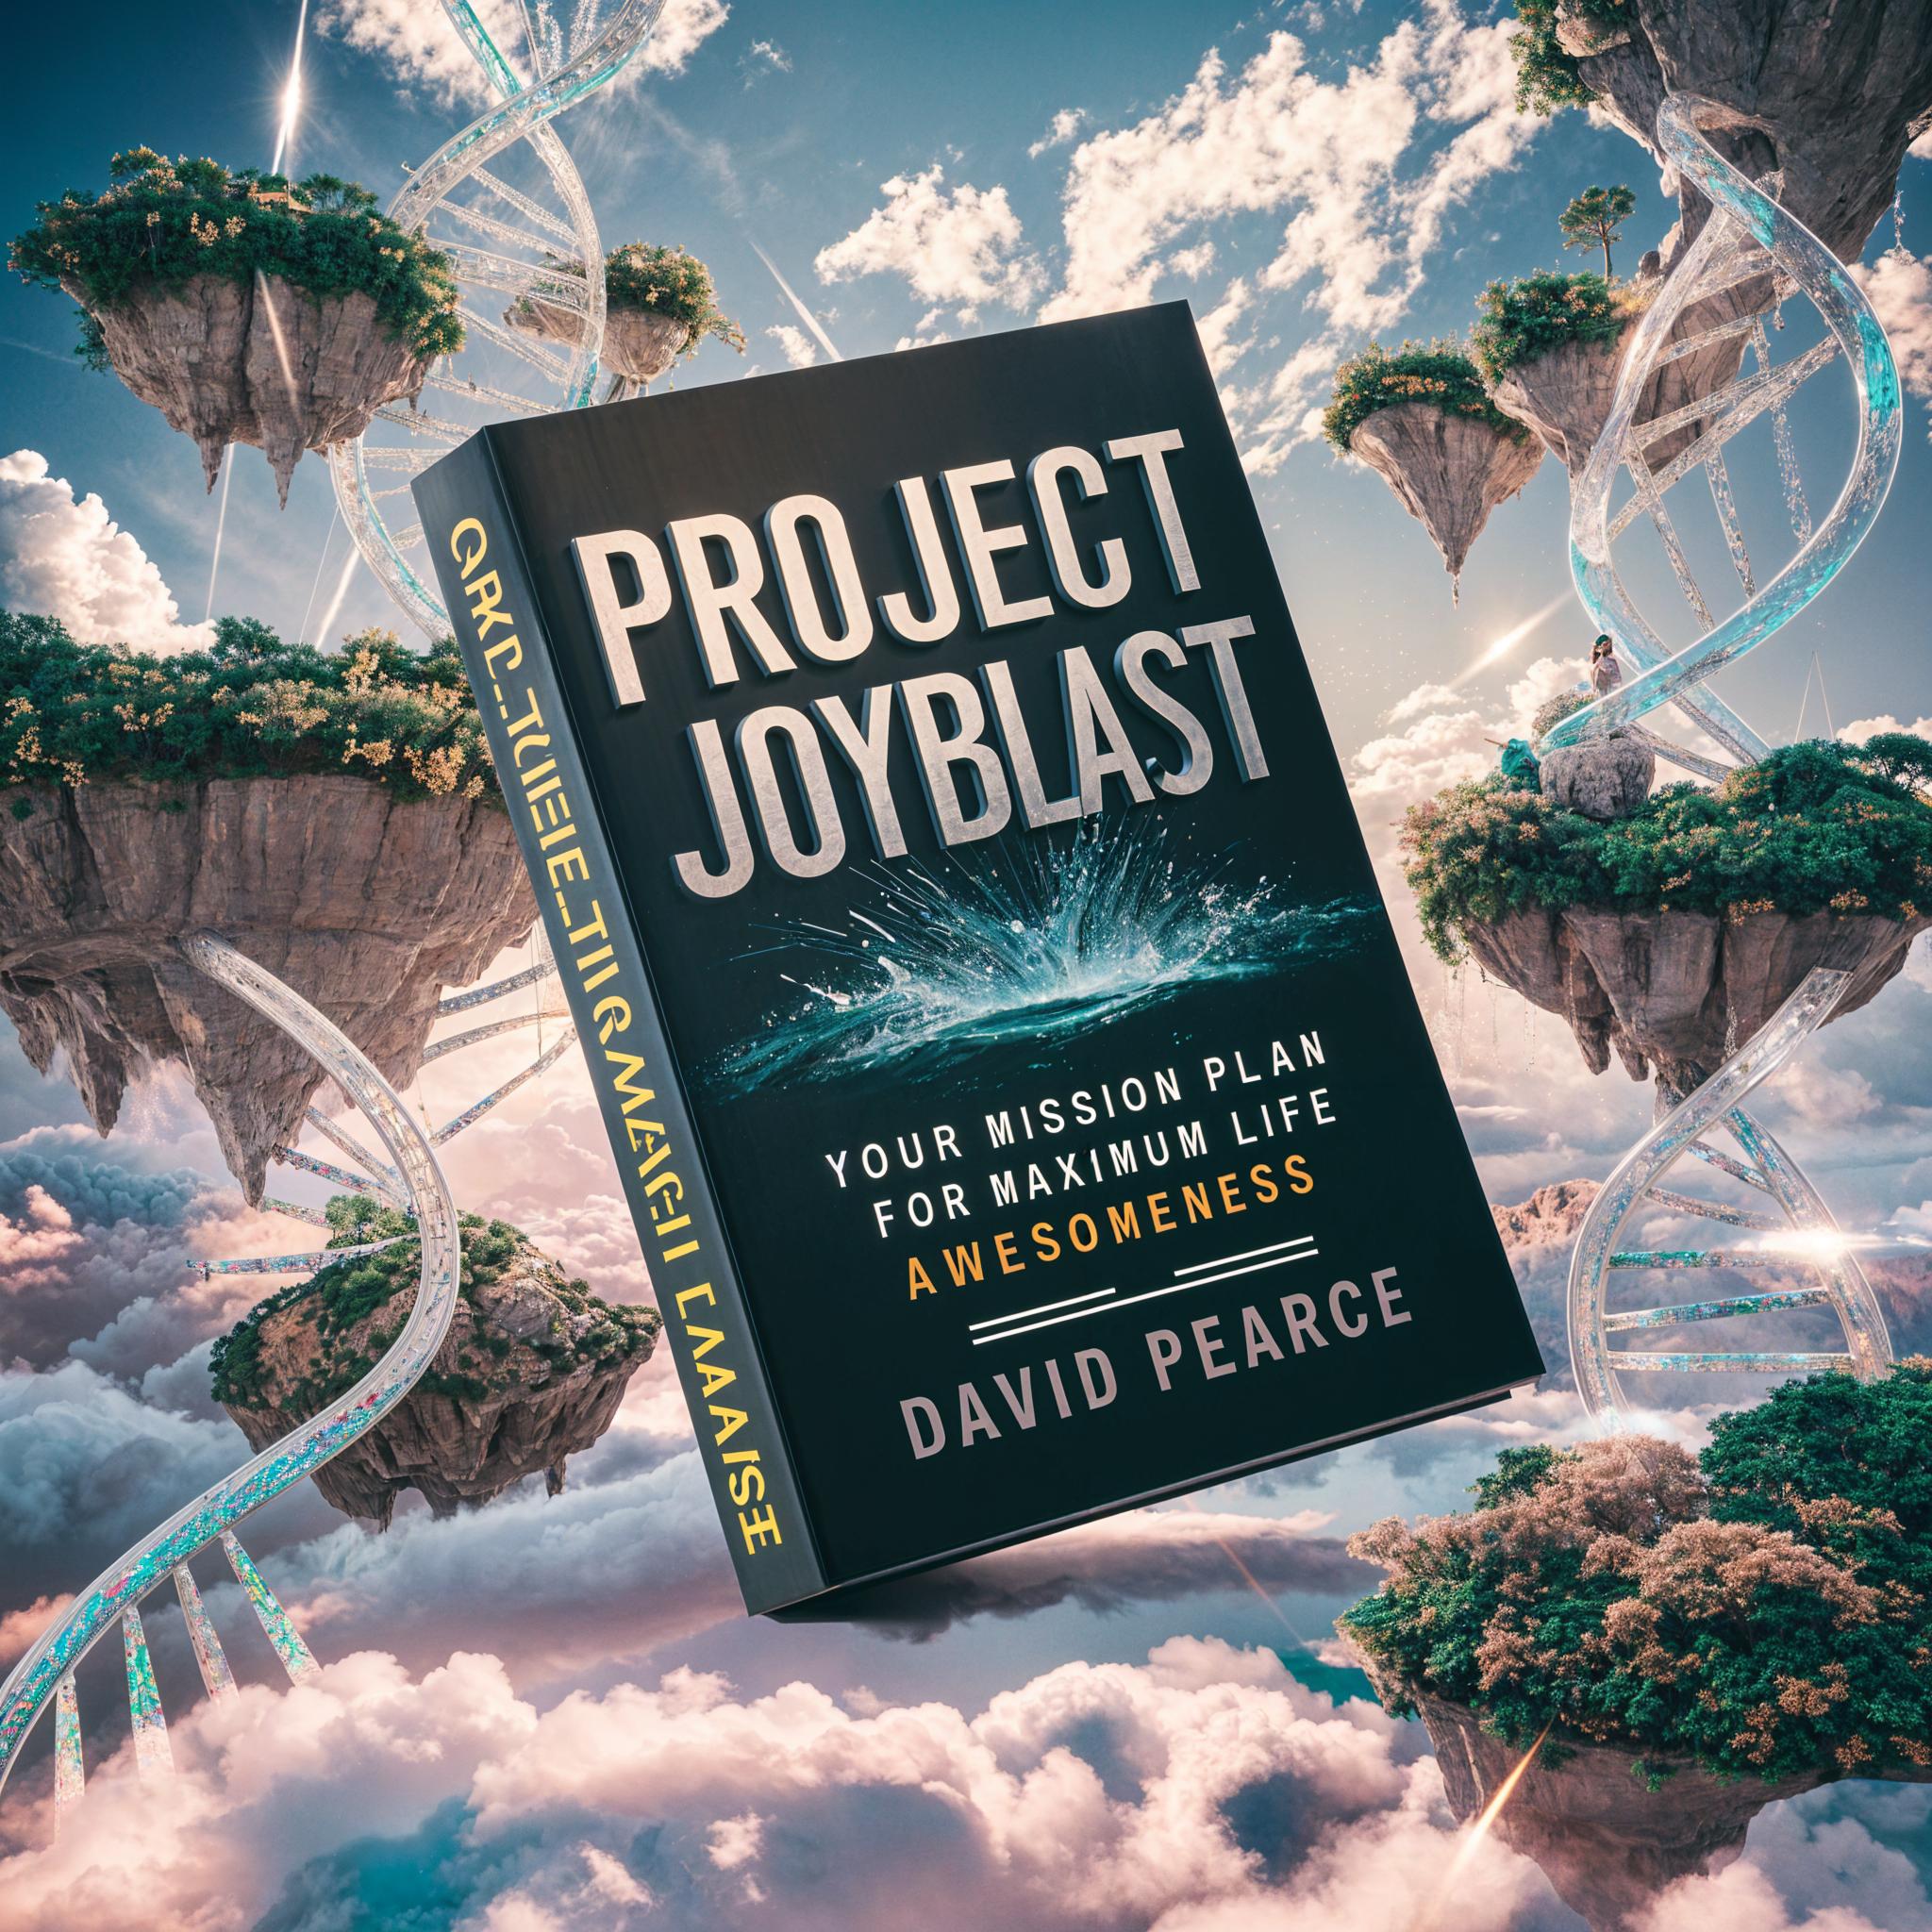 Project Joyblast: Your Mission Plan for Maximum Life Awesomeness by David Pearce